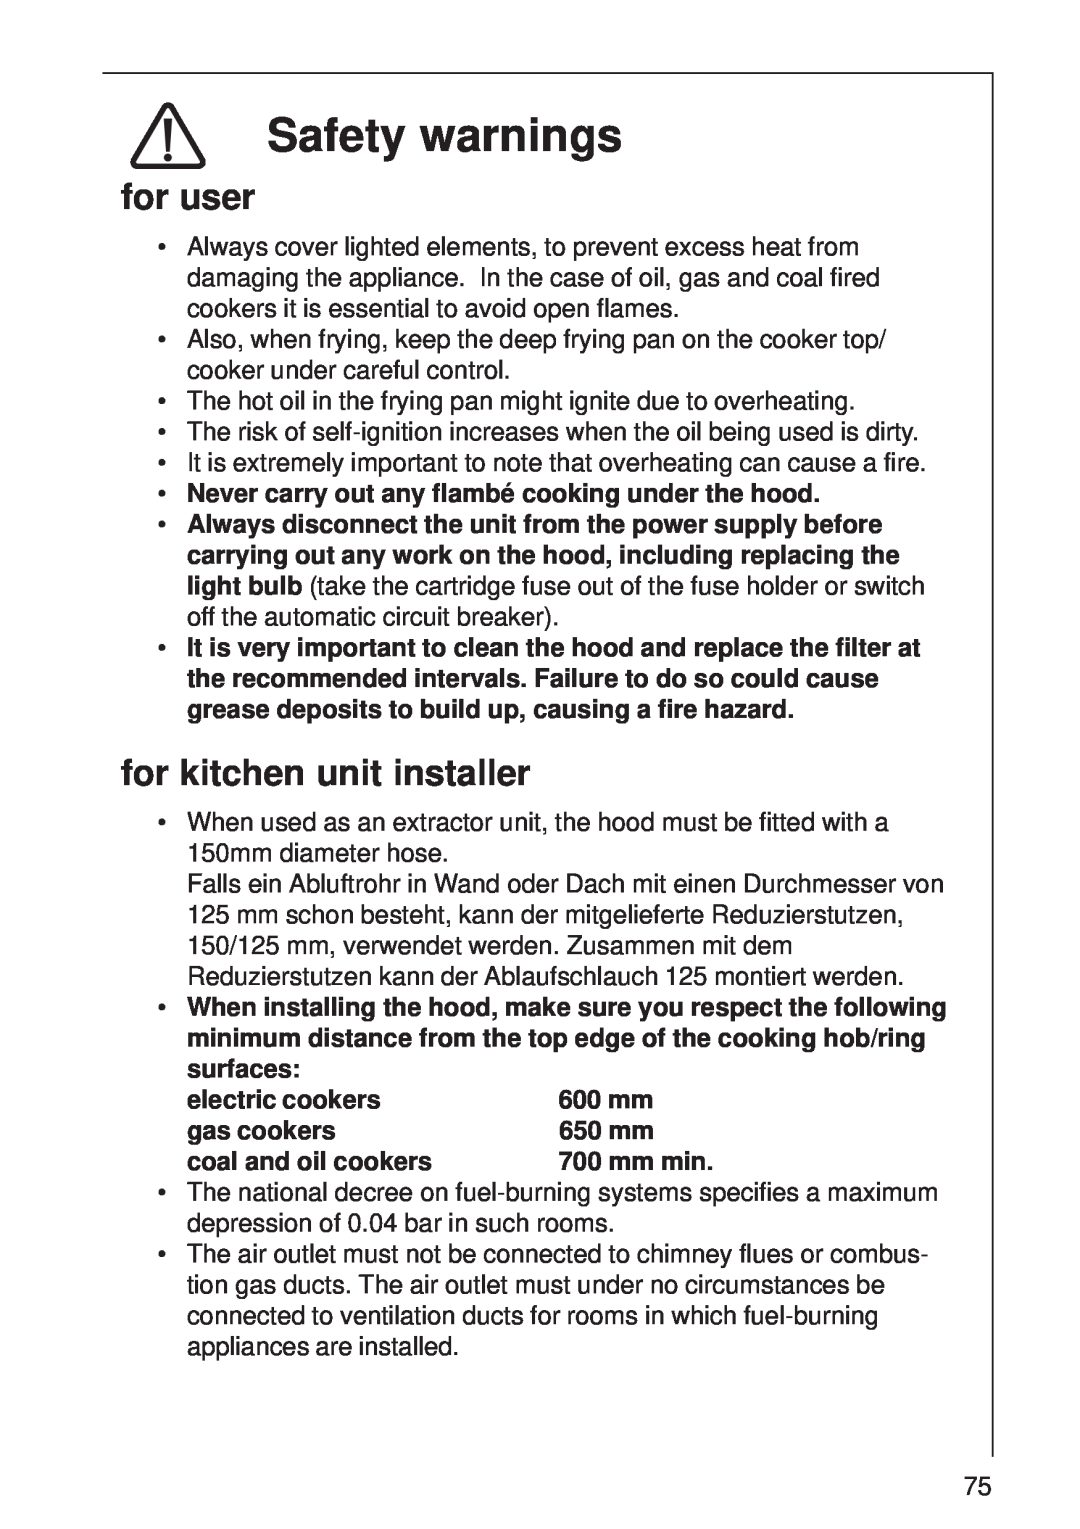 AEG DI 8610 manual Safety warnings, for user, for kitchen unit installer 